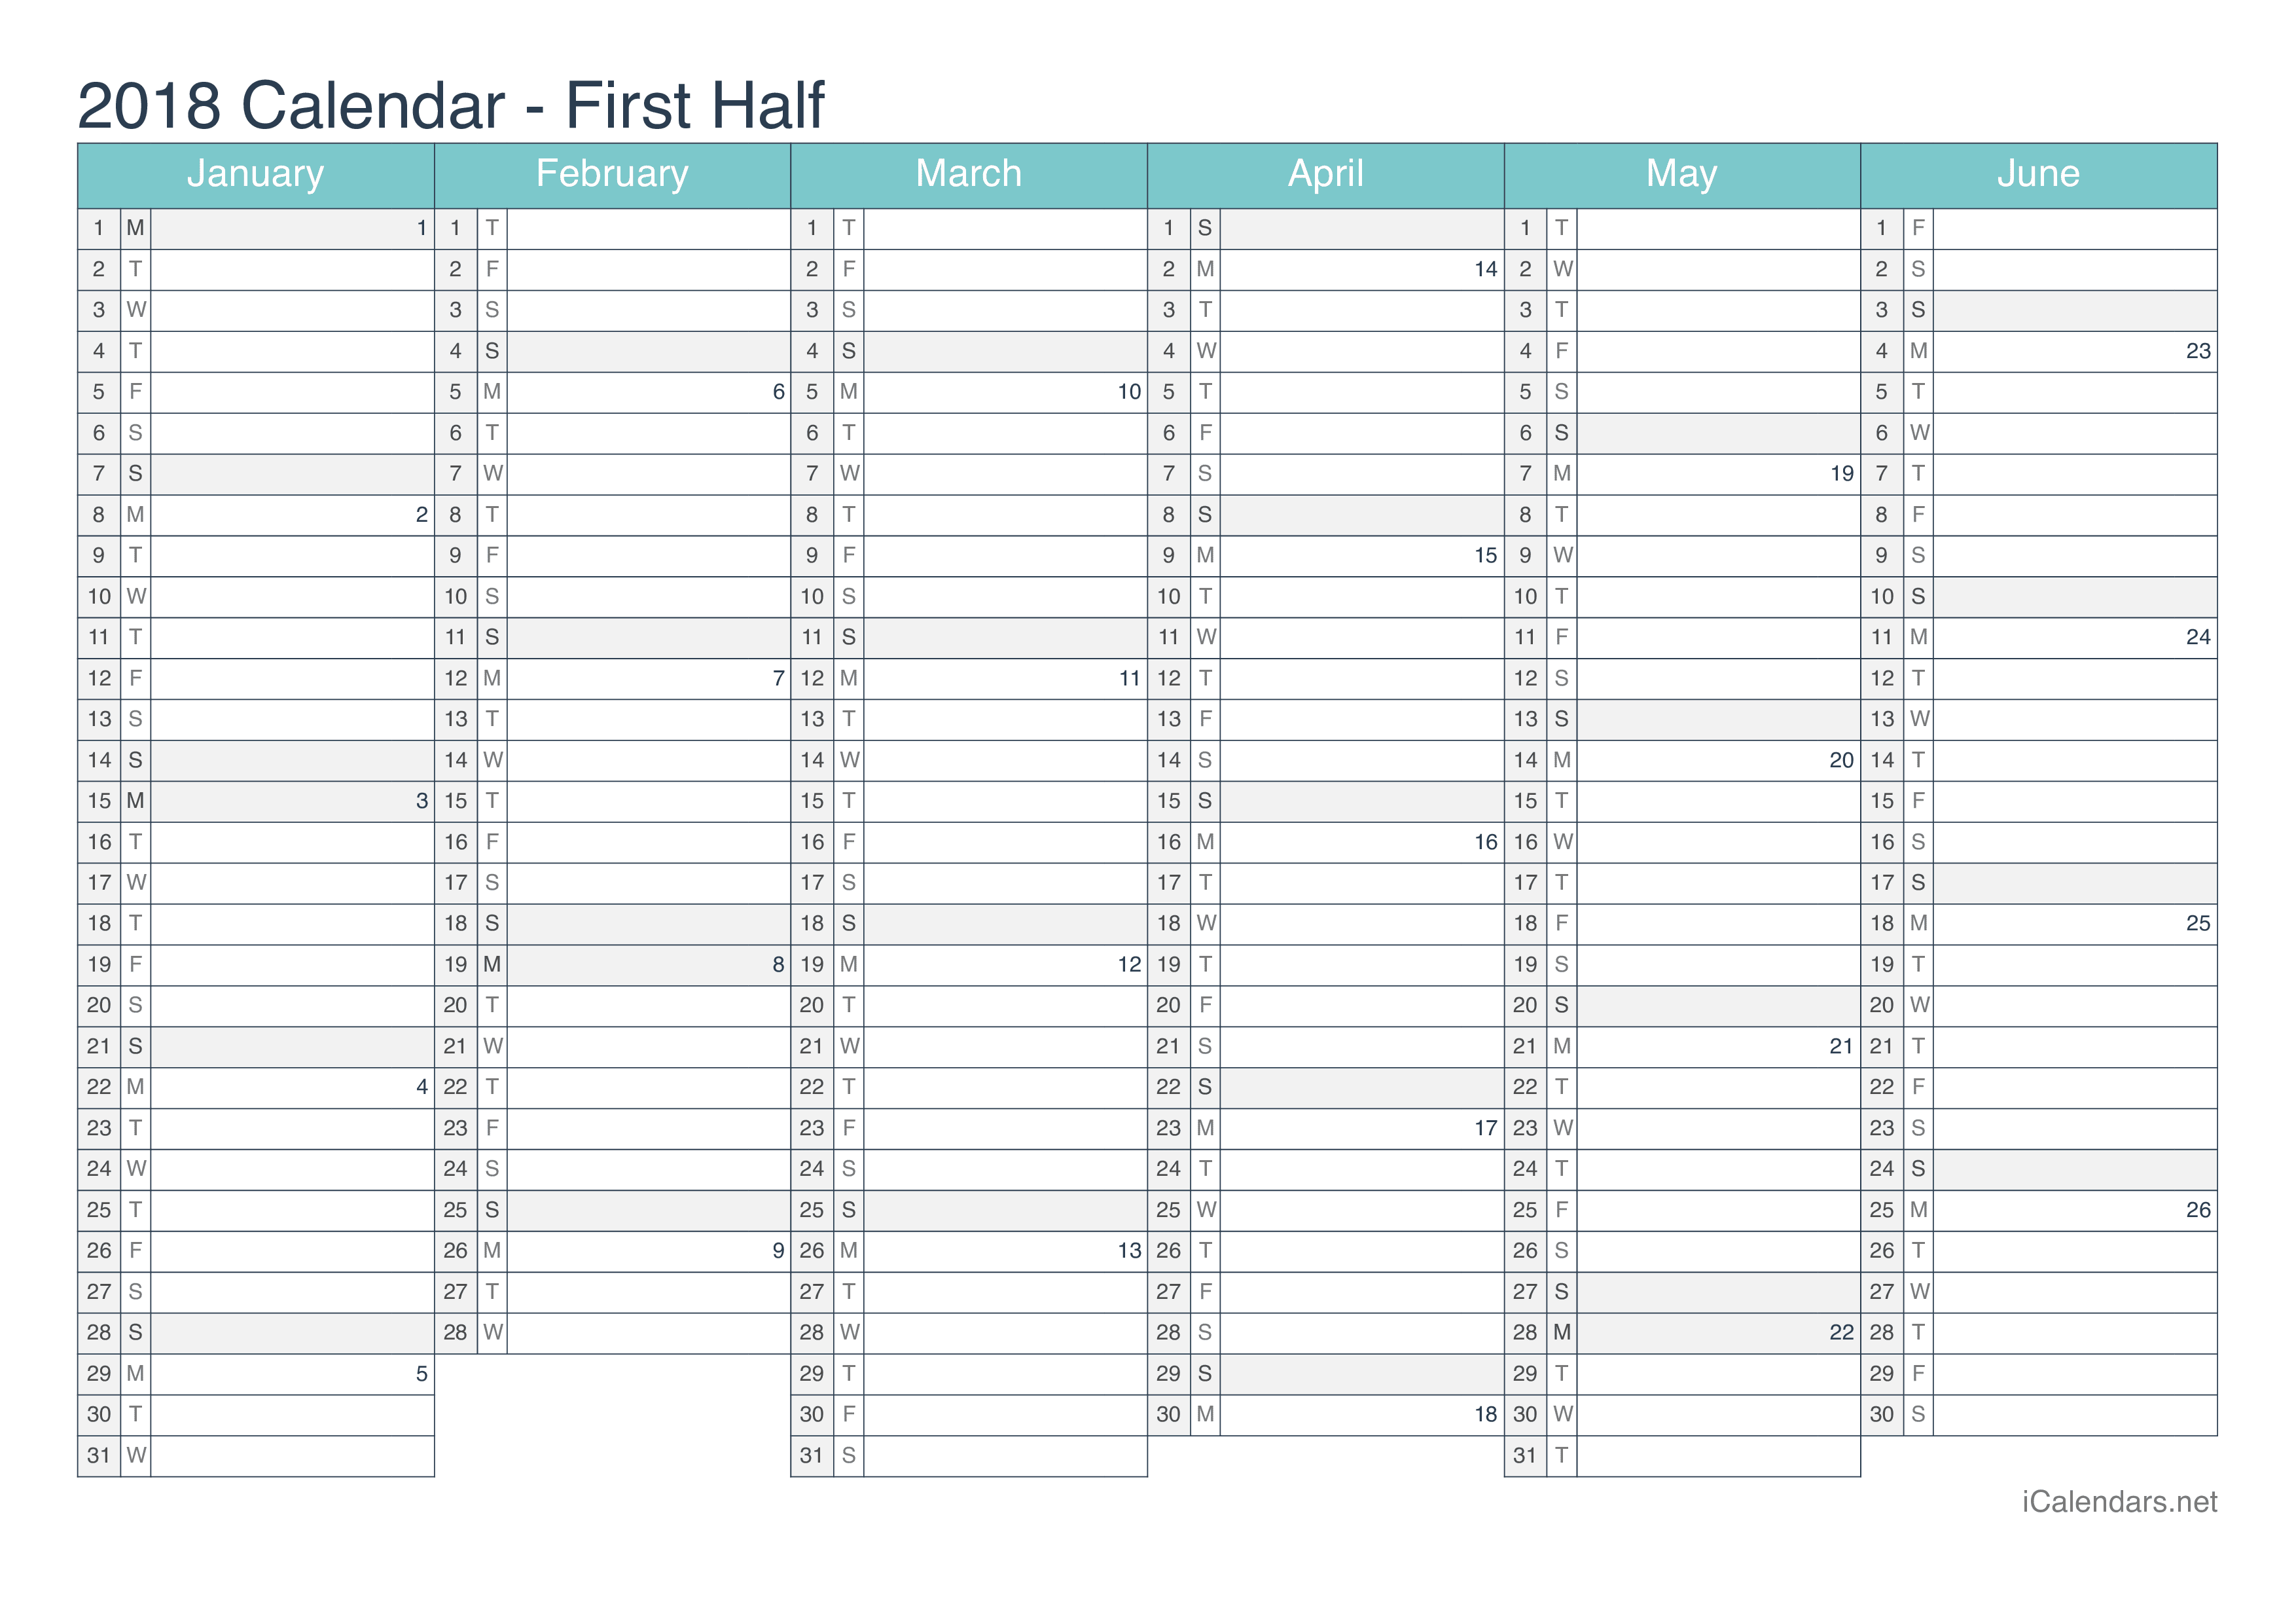 2018 Half year calendar with week numbers - Turquoise